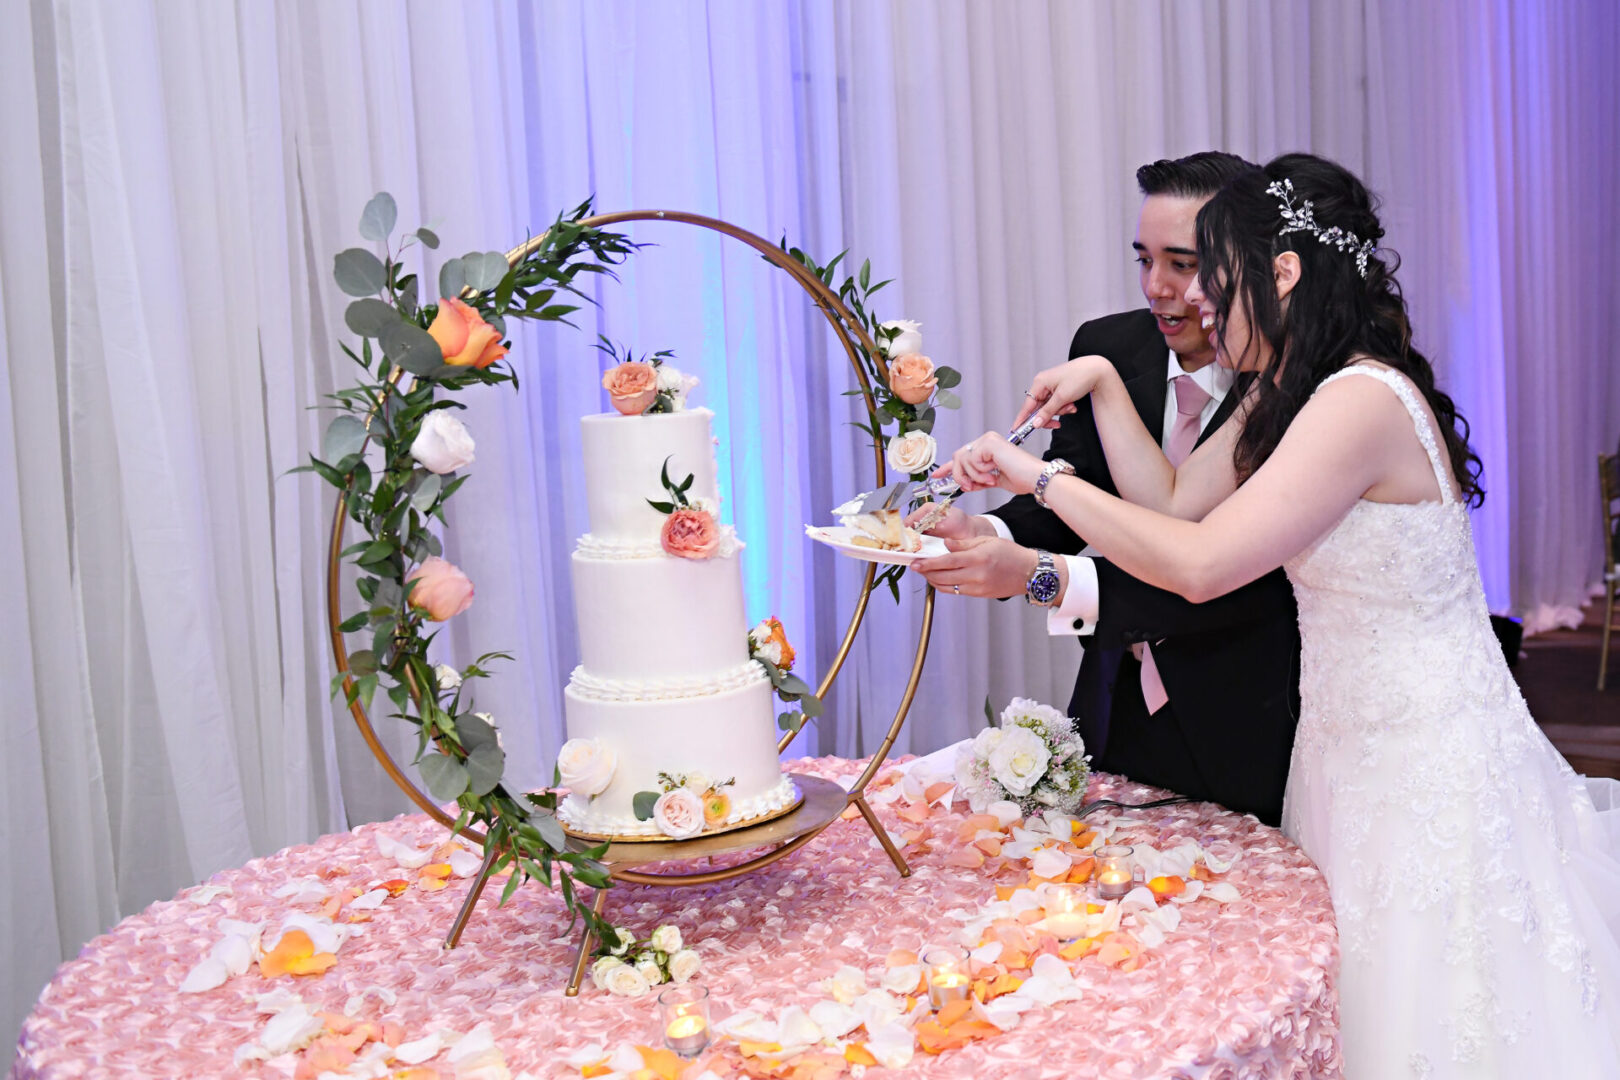 A Newly Weeded Couple Cutting a Cake